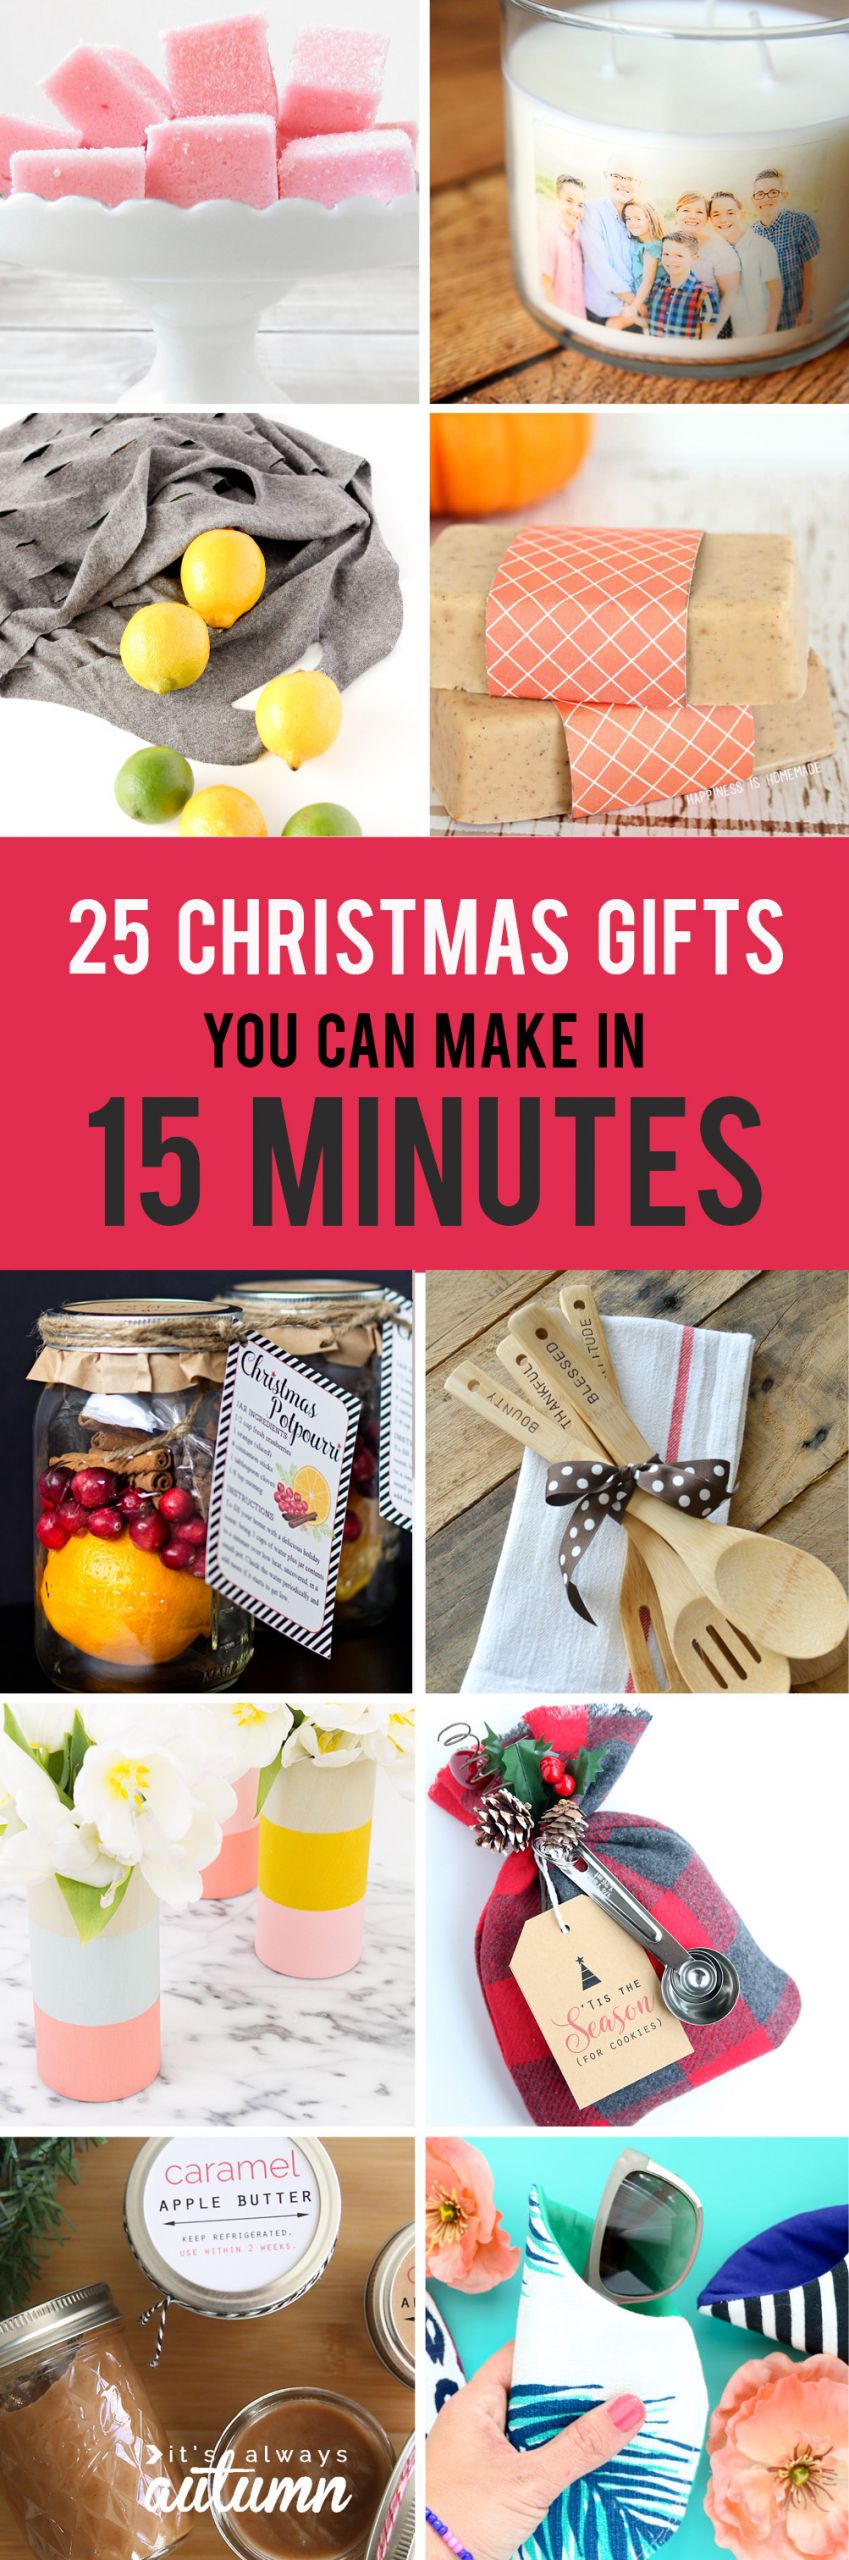 DIY Christmas Gifts Videos
 25 easy homemade Christmas ts you can make in 15